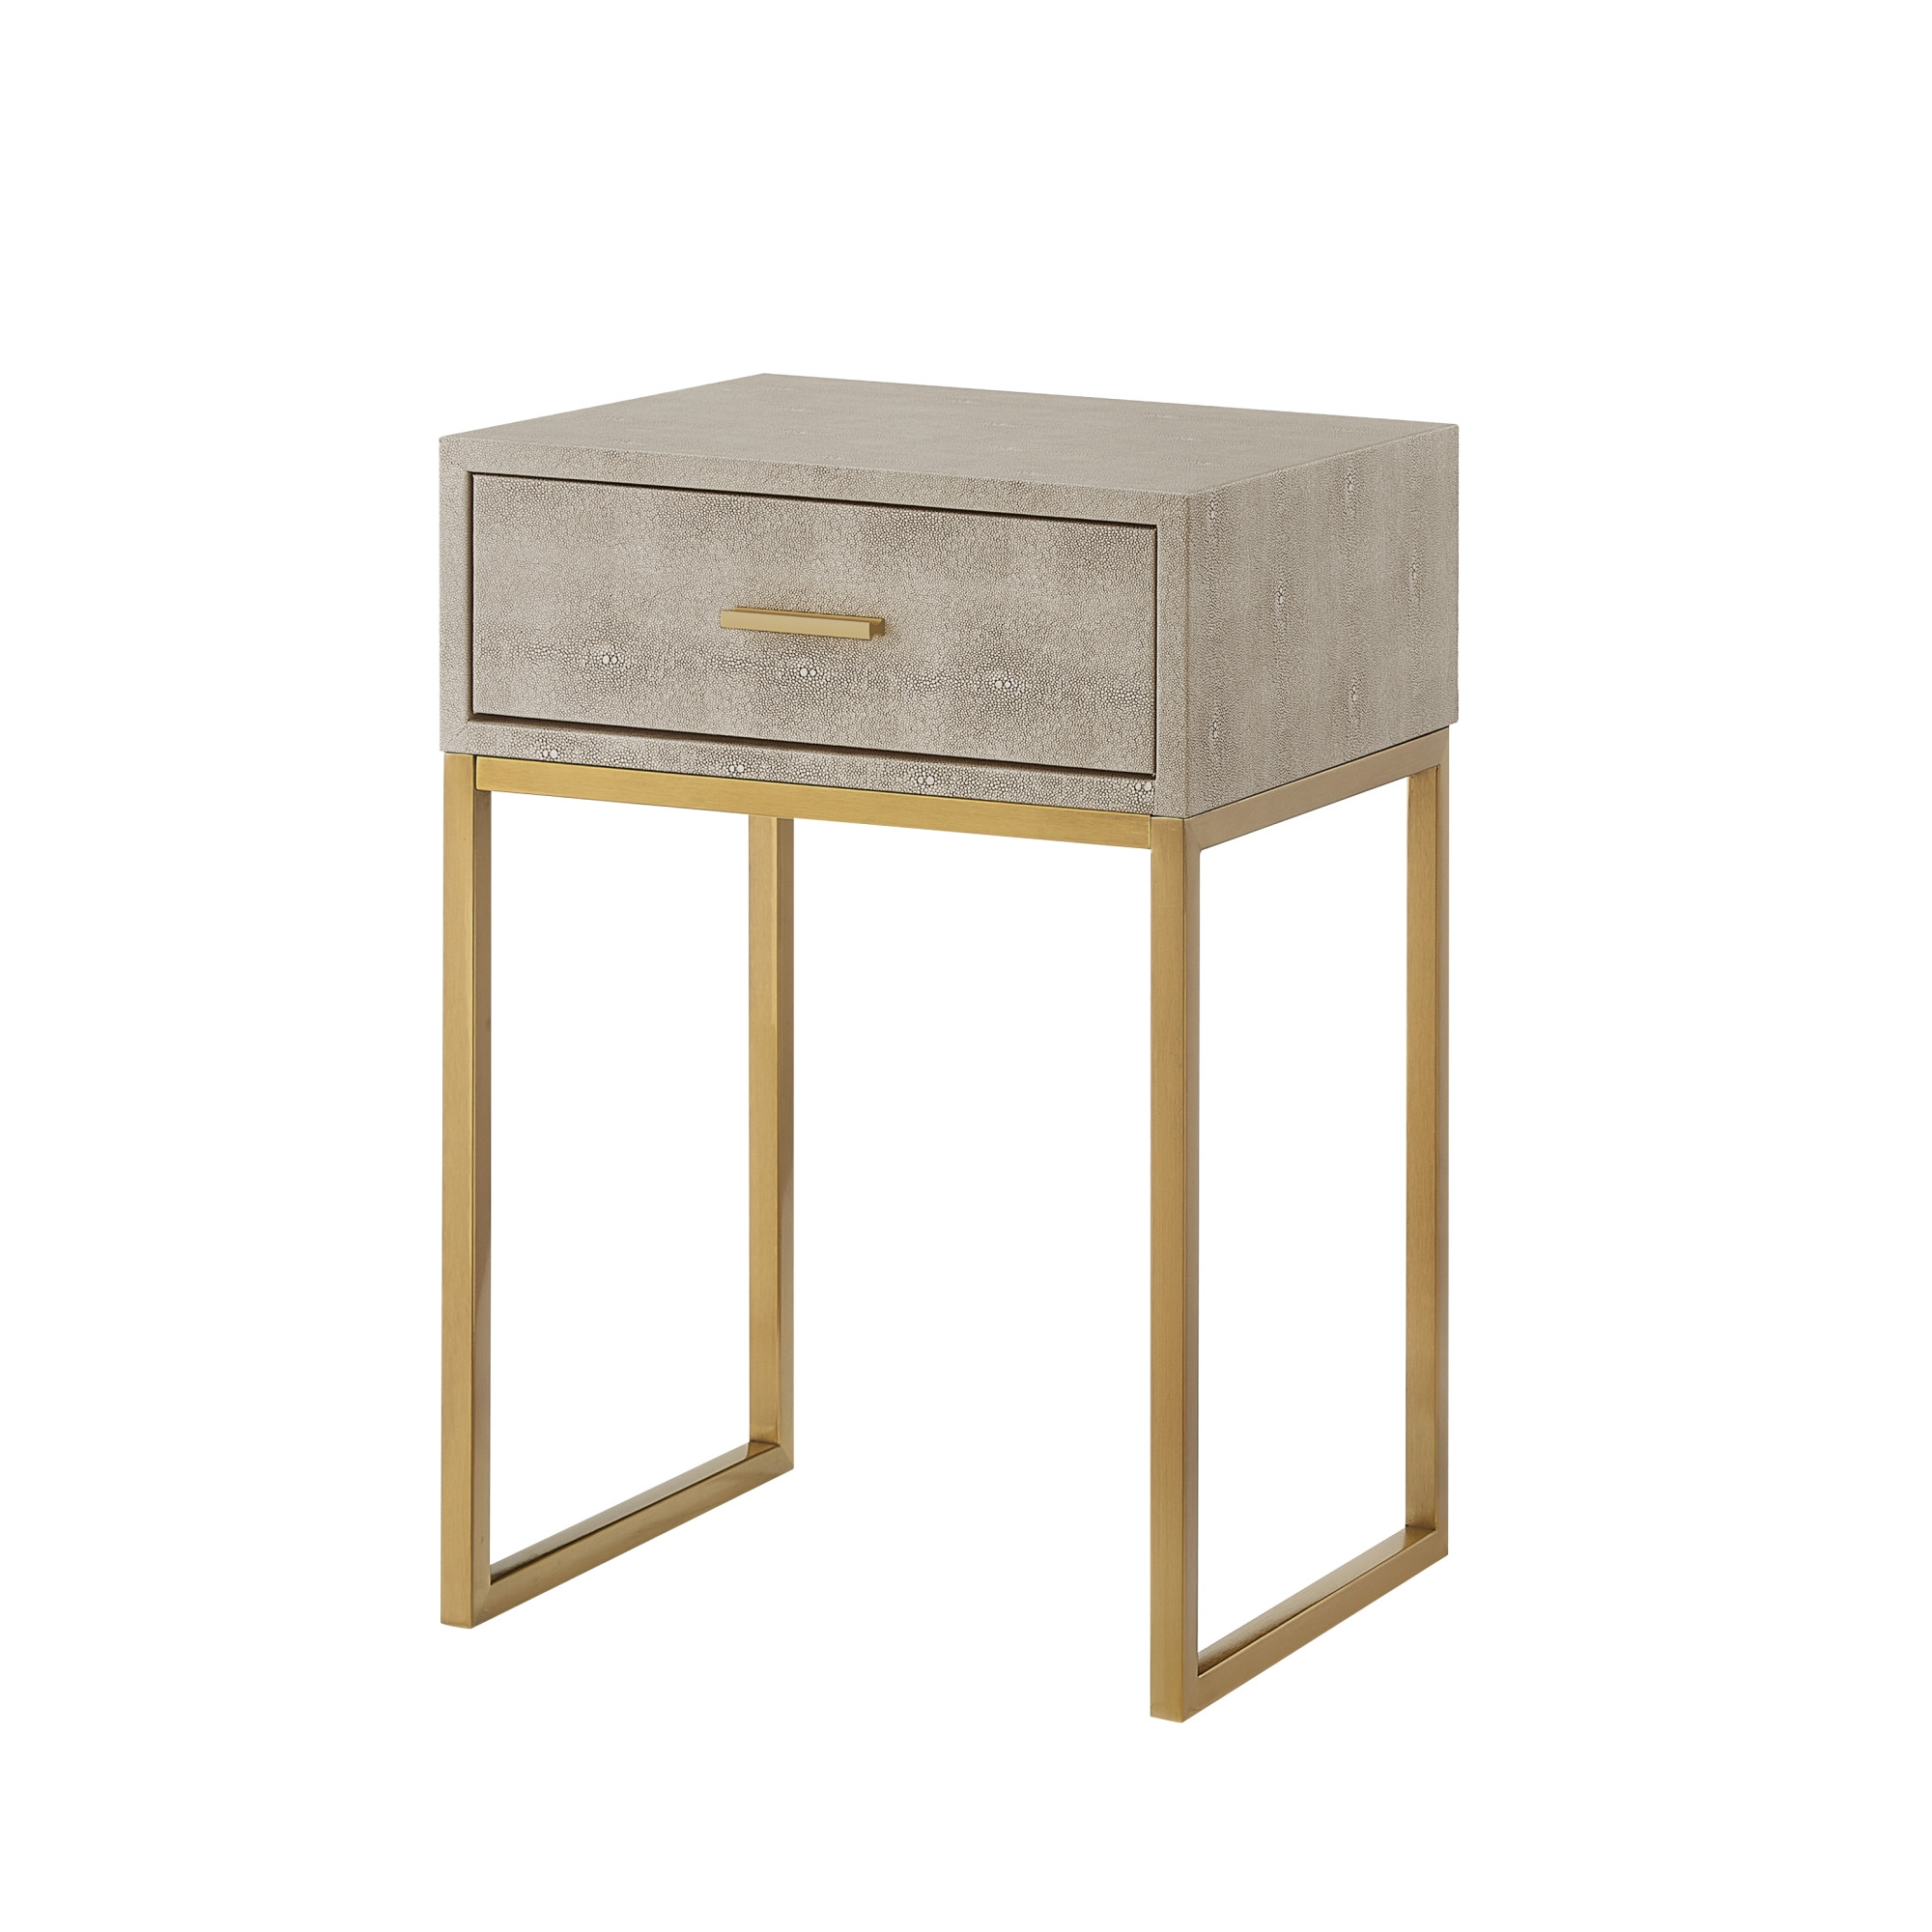 24" Gold and Cream End Table with Drawer-543908-1